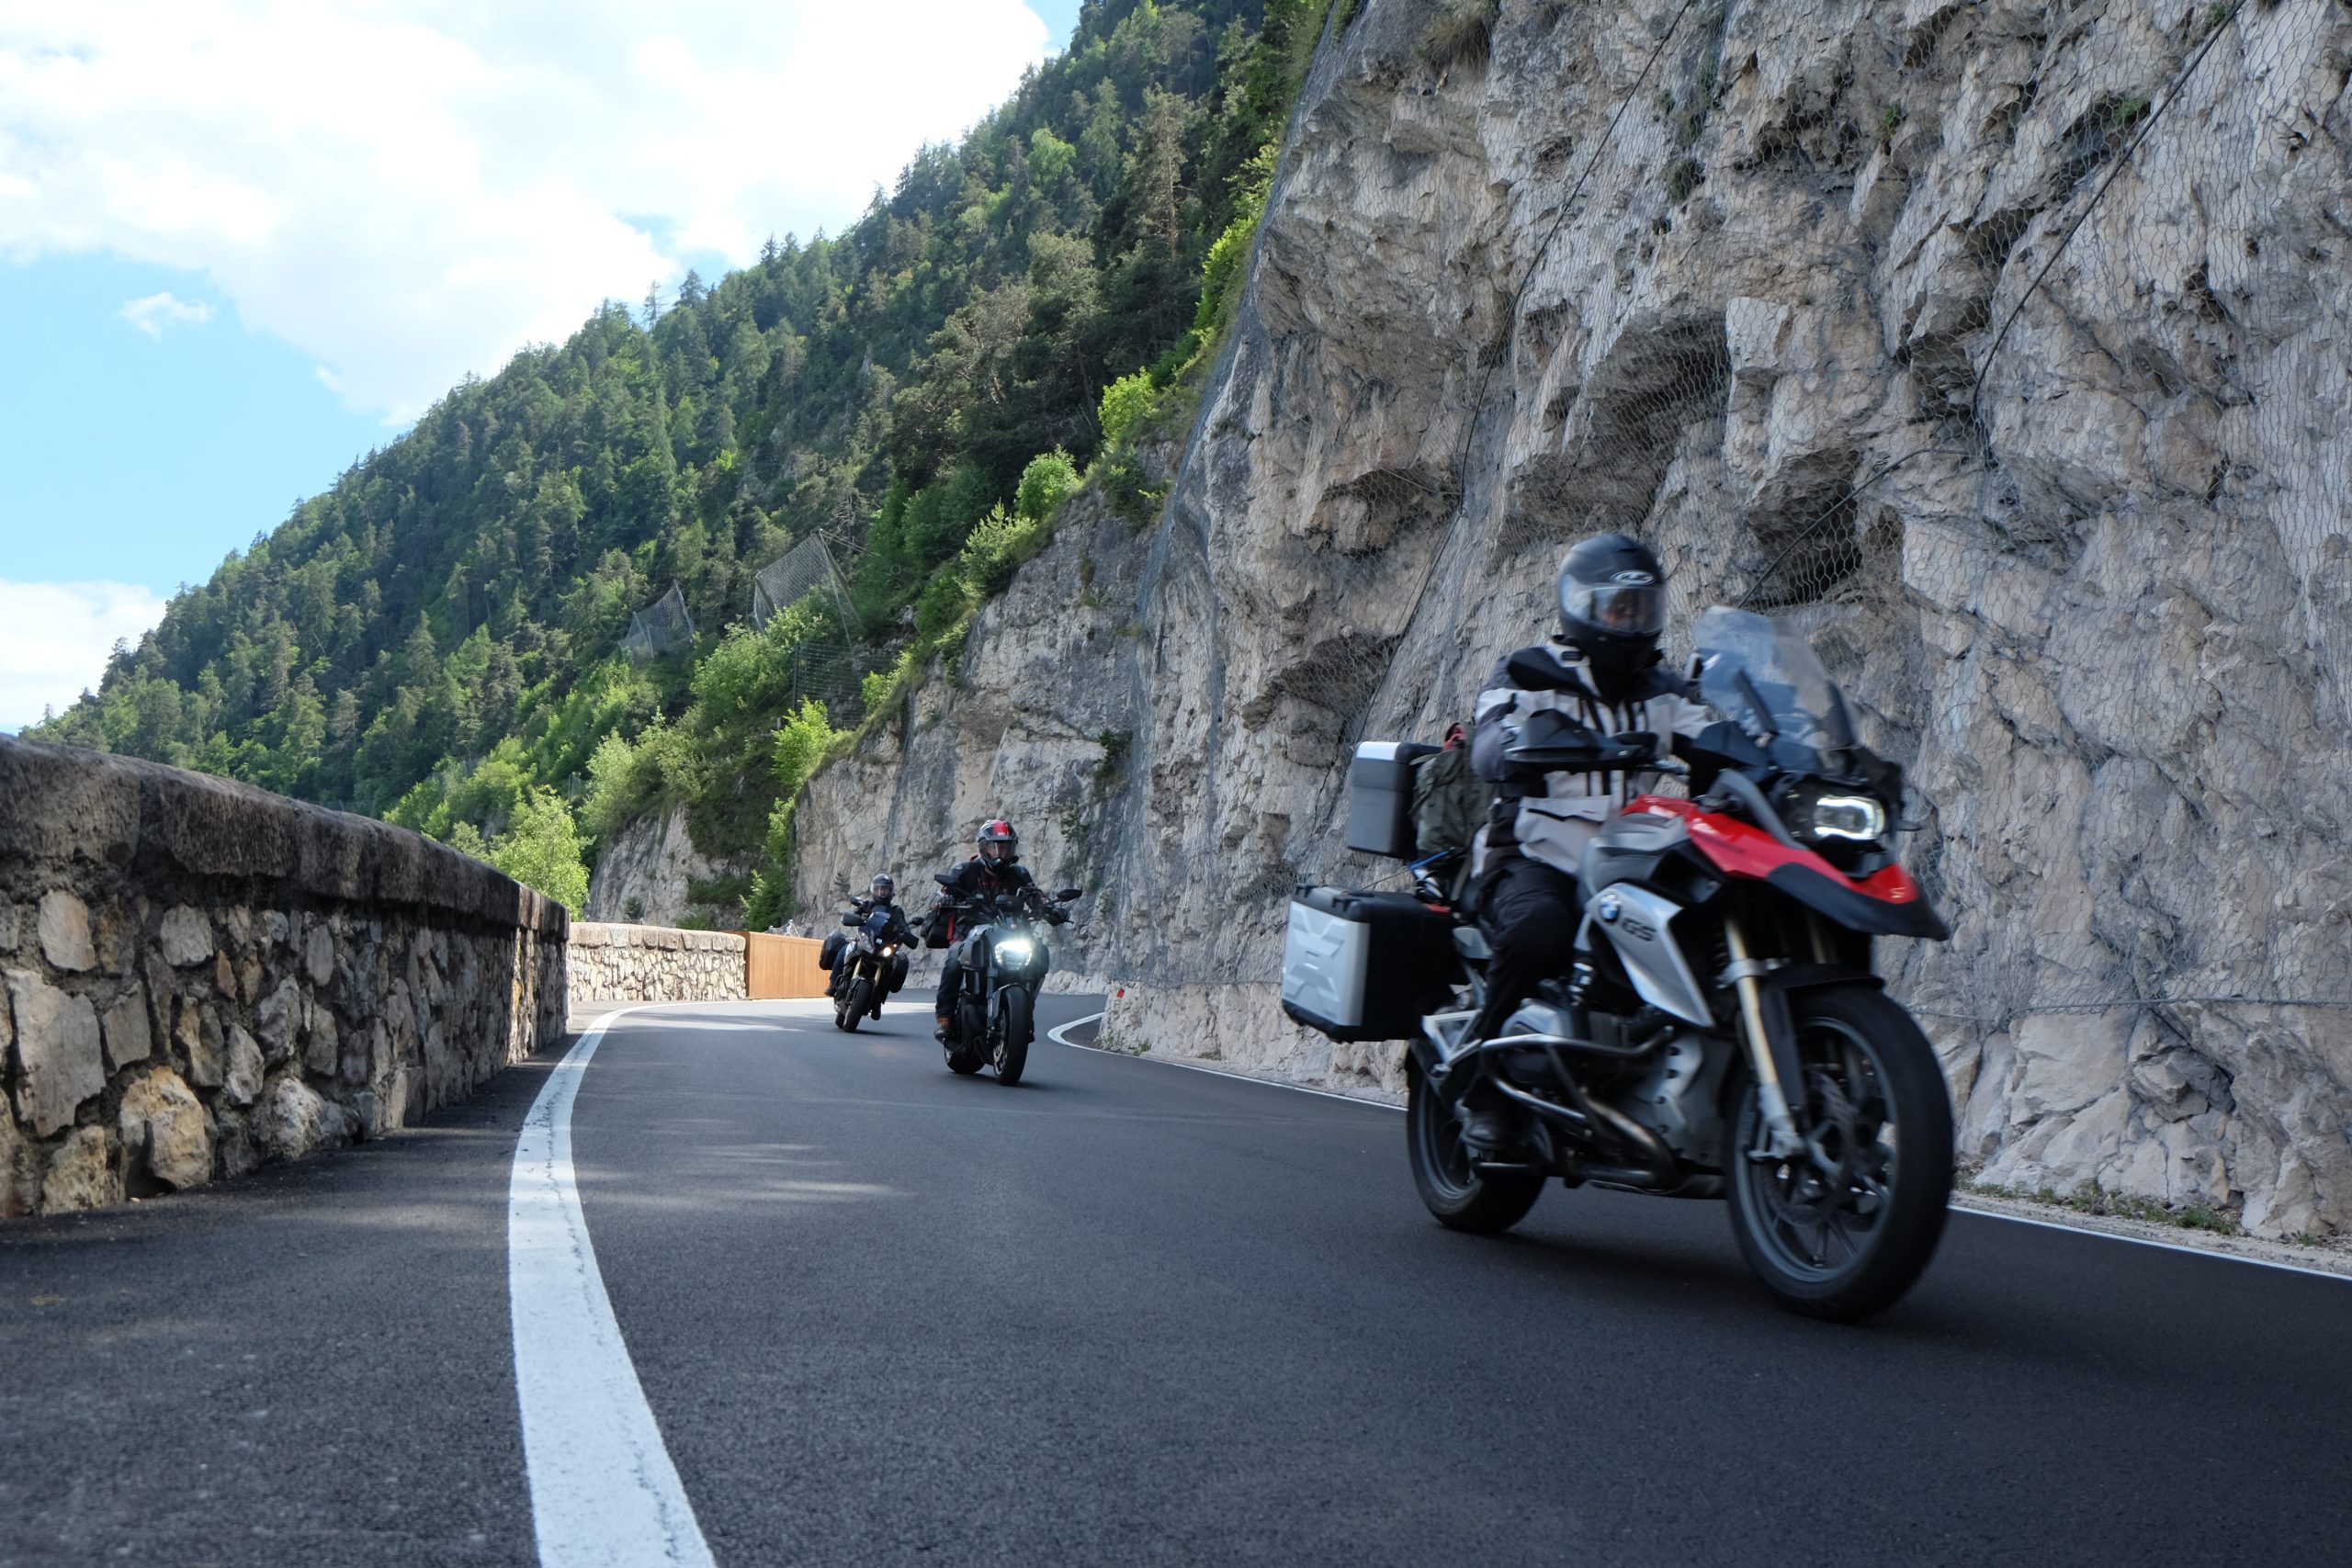 "Beyond Borders: International Motorcycle Tours You Need to Experience"